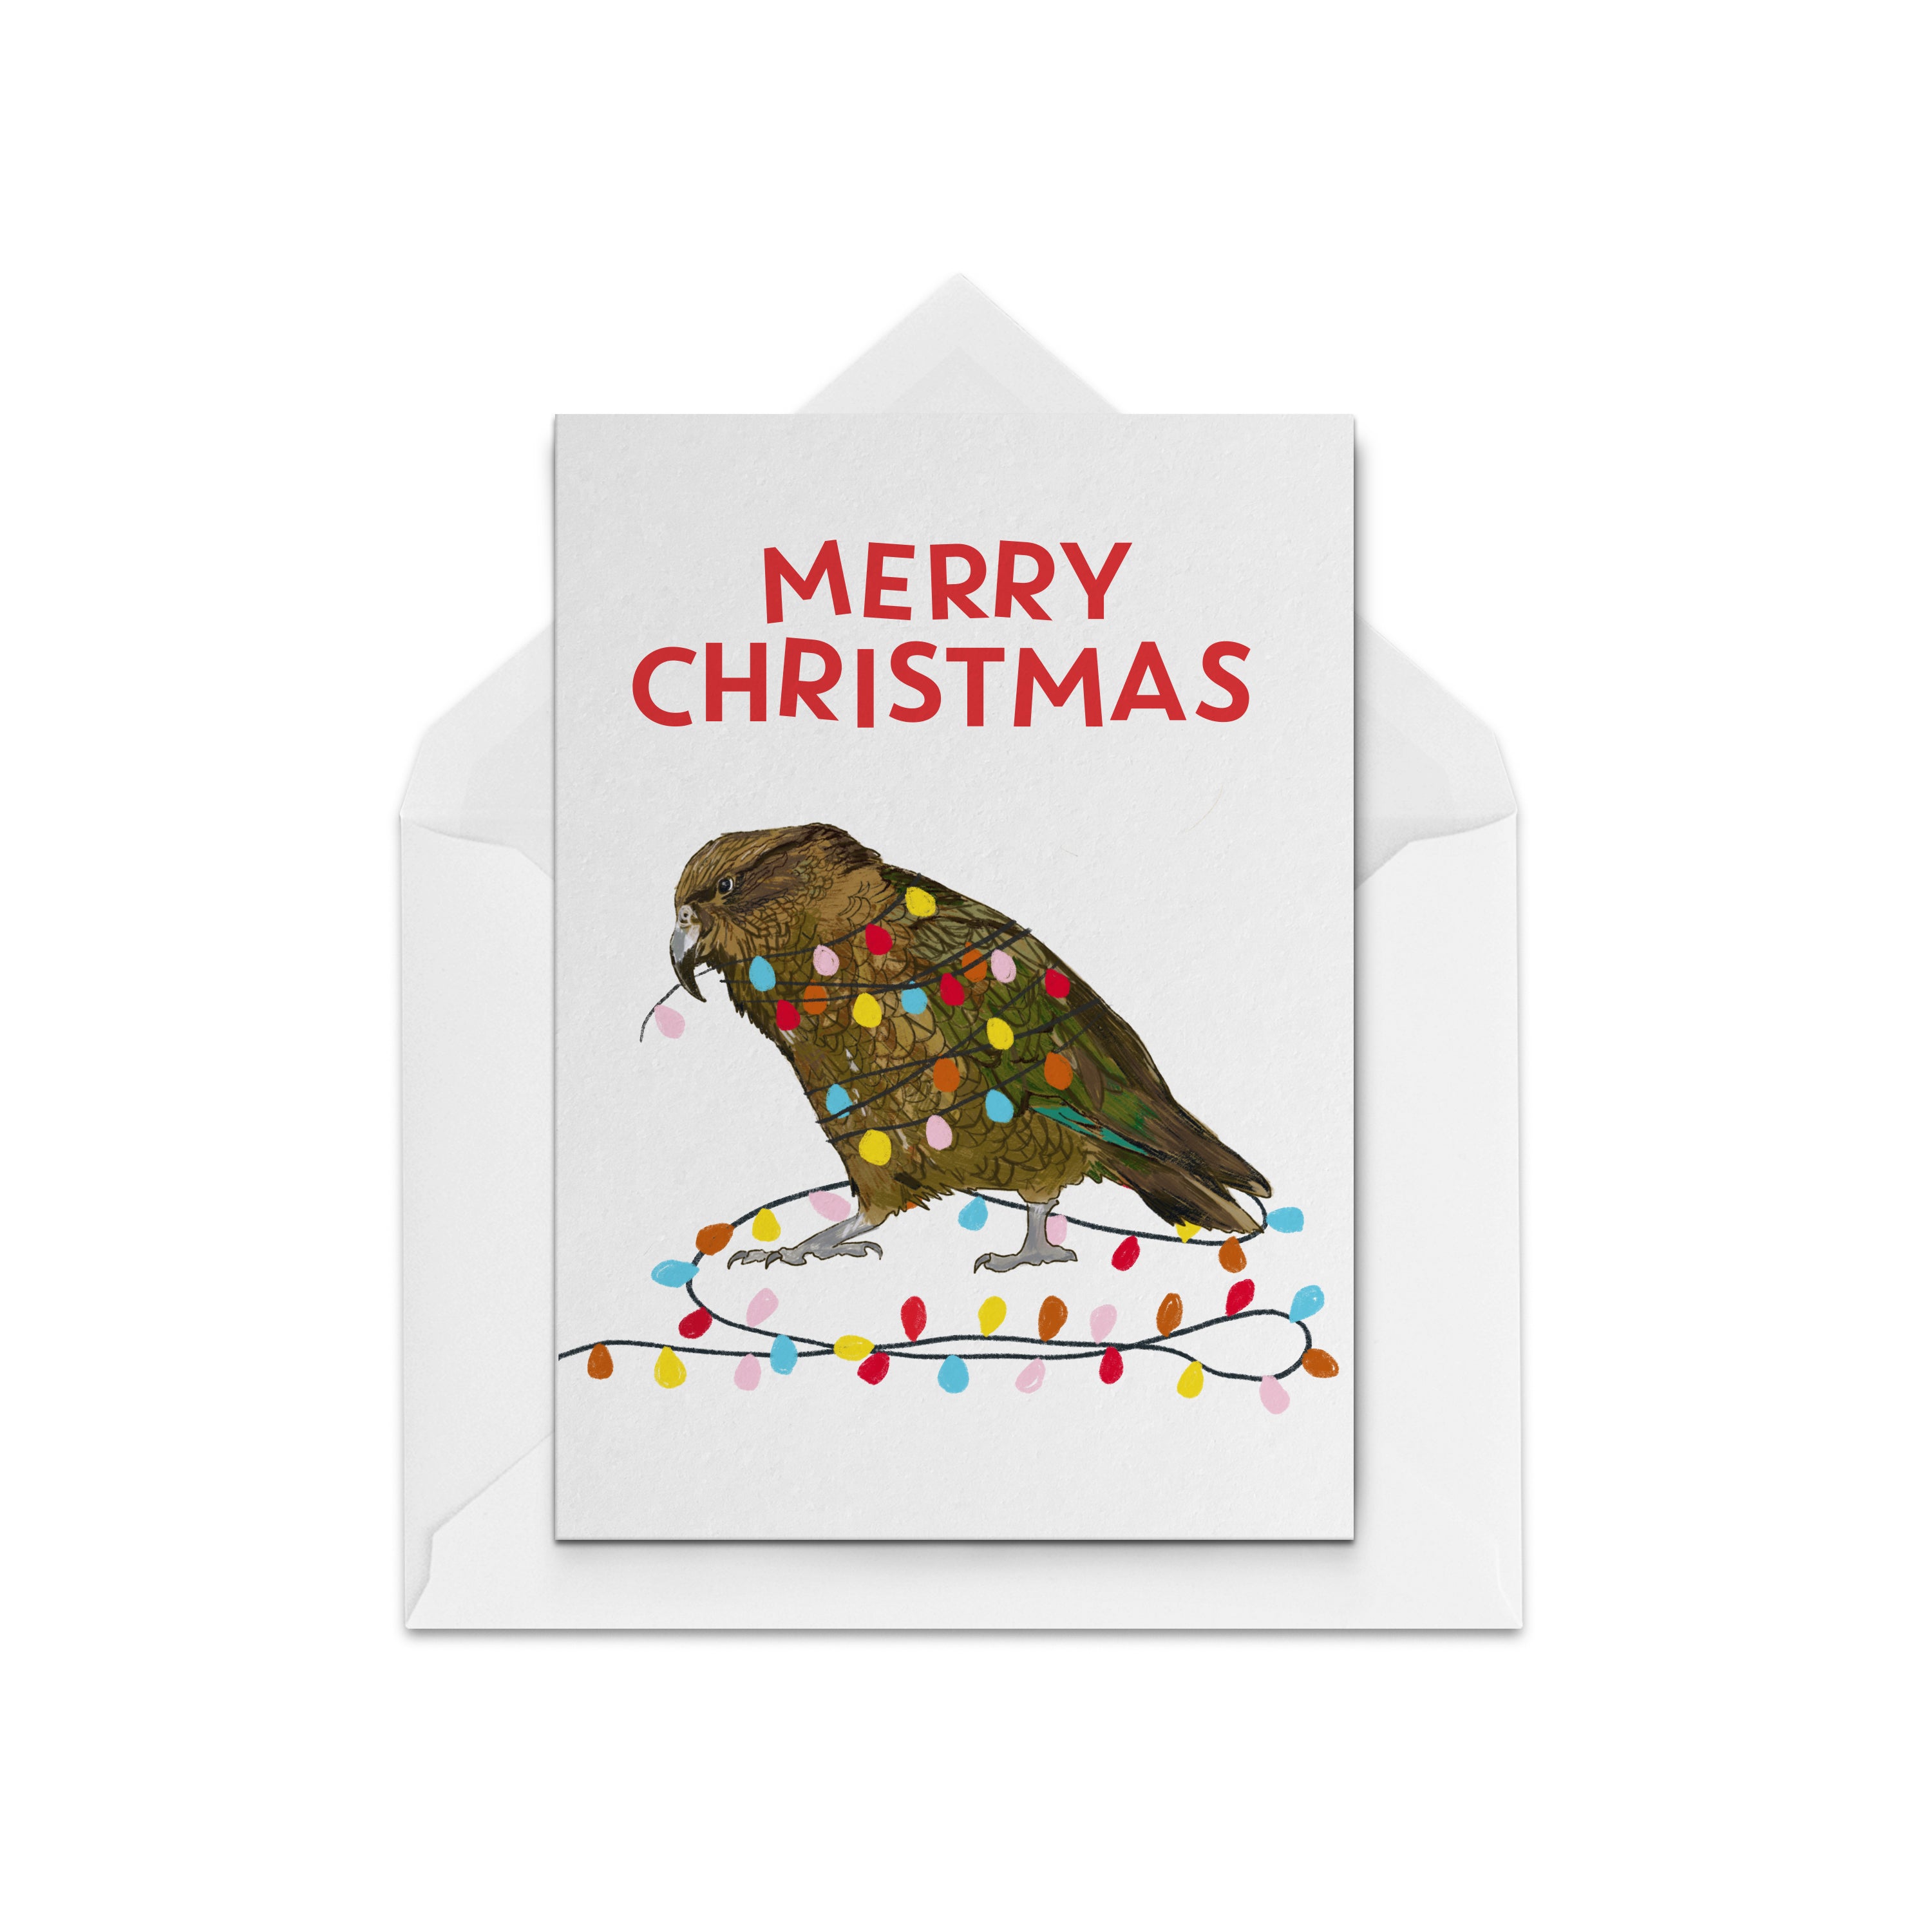 Kea Lights - The Paper People Greeting Cards